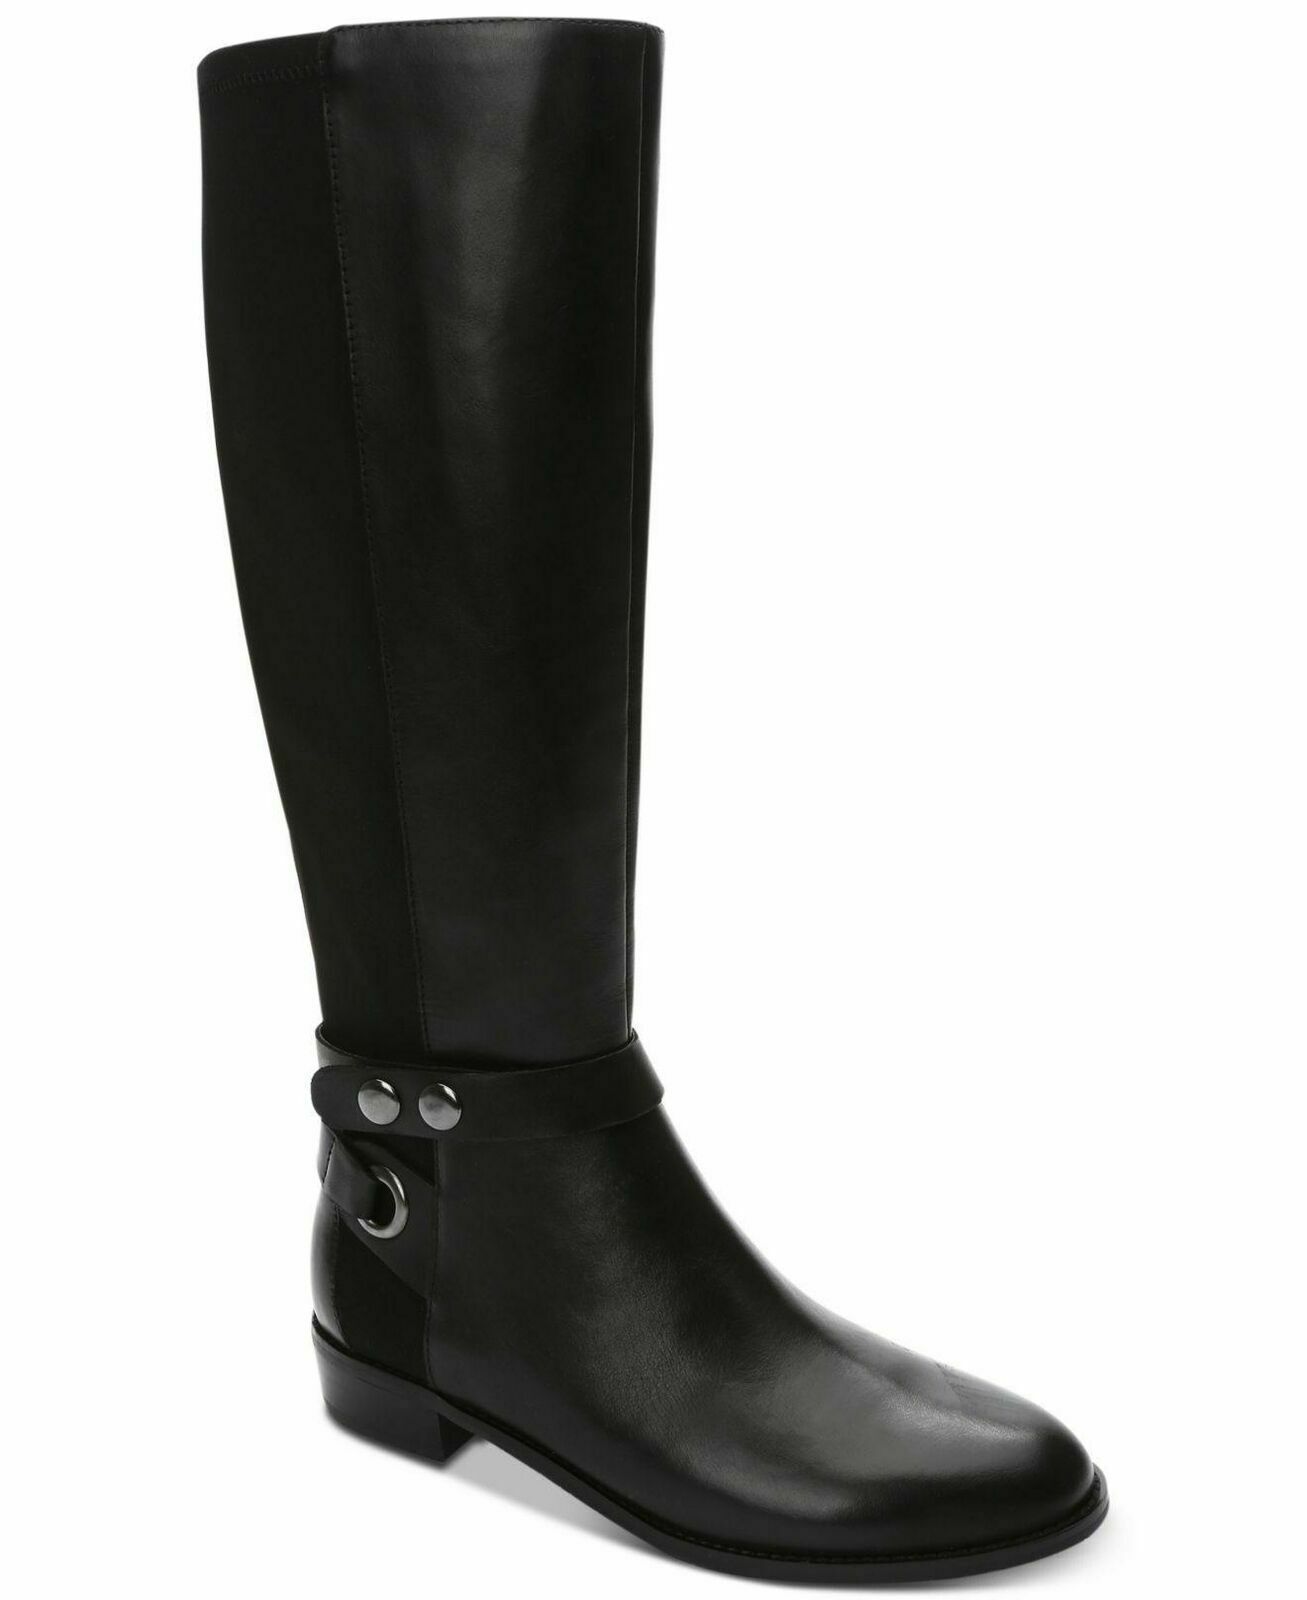 TAHARI Womens Rooster Faux Leather Wide Calf Riding Boots Black, 5.5 M US - $50.14